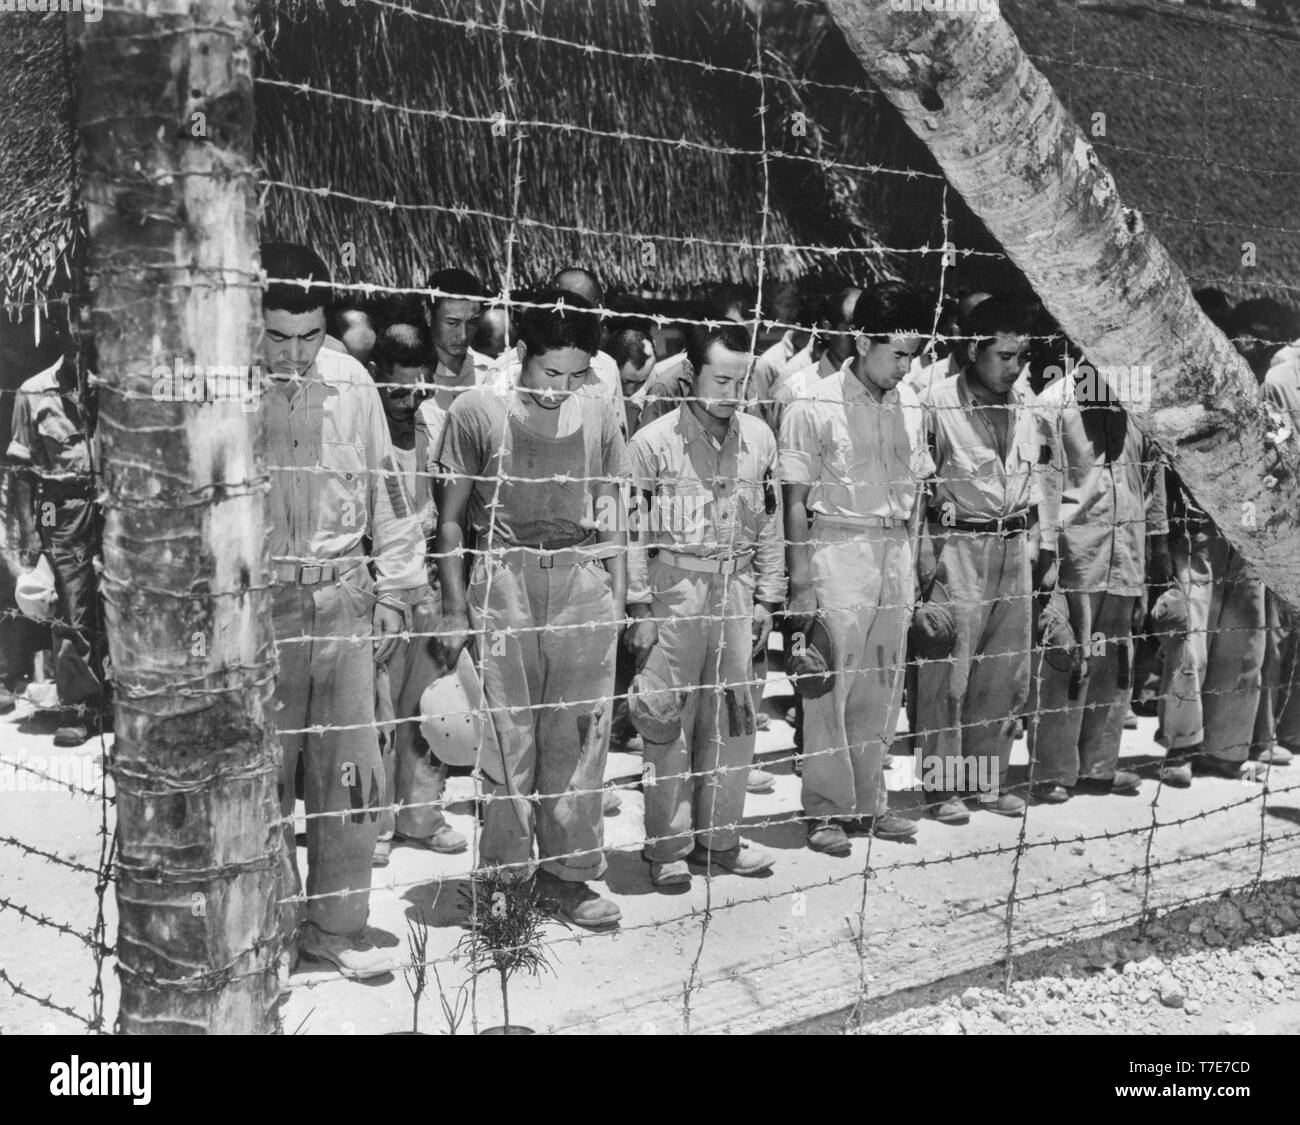 Japanese POW, with heads bowed after hearing Emperor Hirohito make Announcement of Japan's Unconditional Surrender, Guam, U.S. Navy Photo, August 15, 1945 Stock Photo